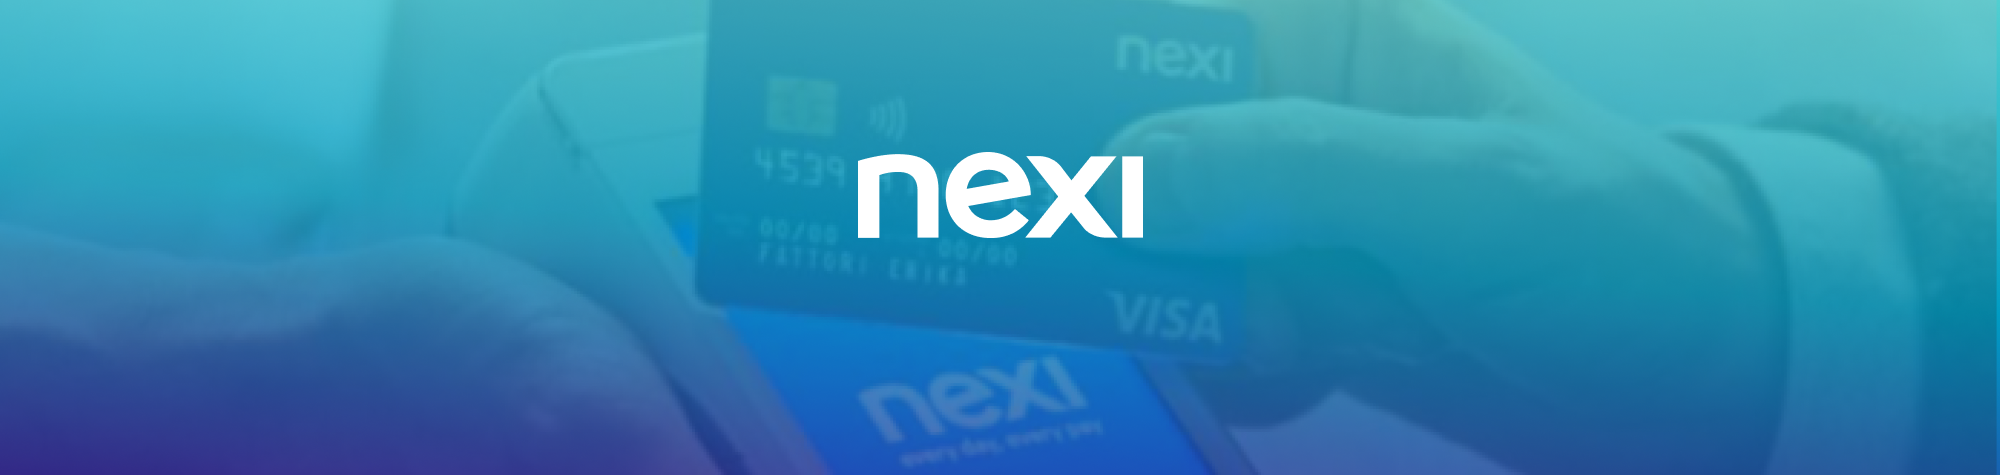 Bcame partners with Nexi